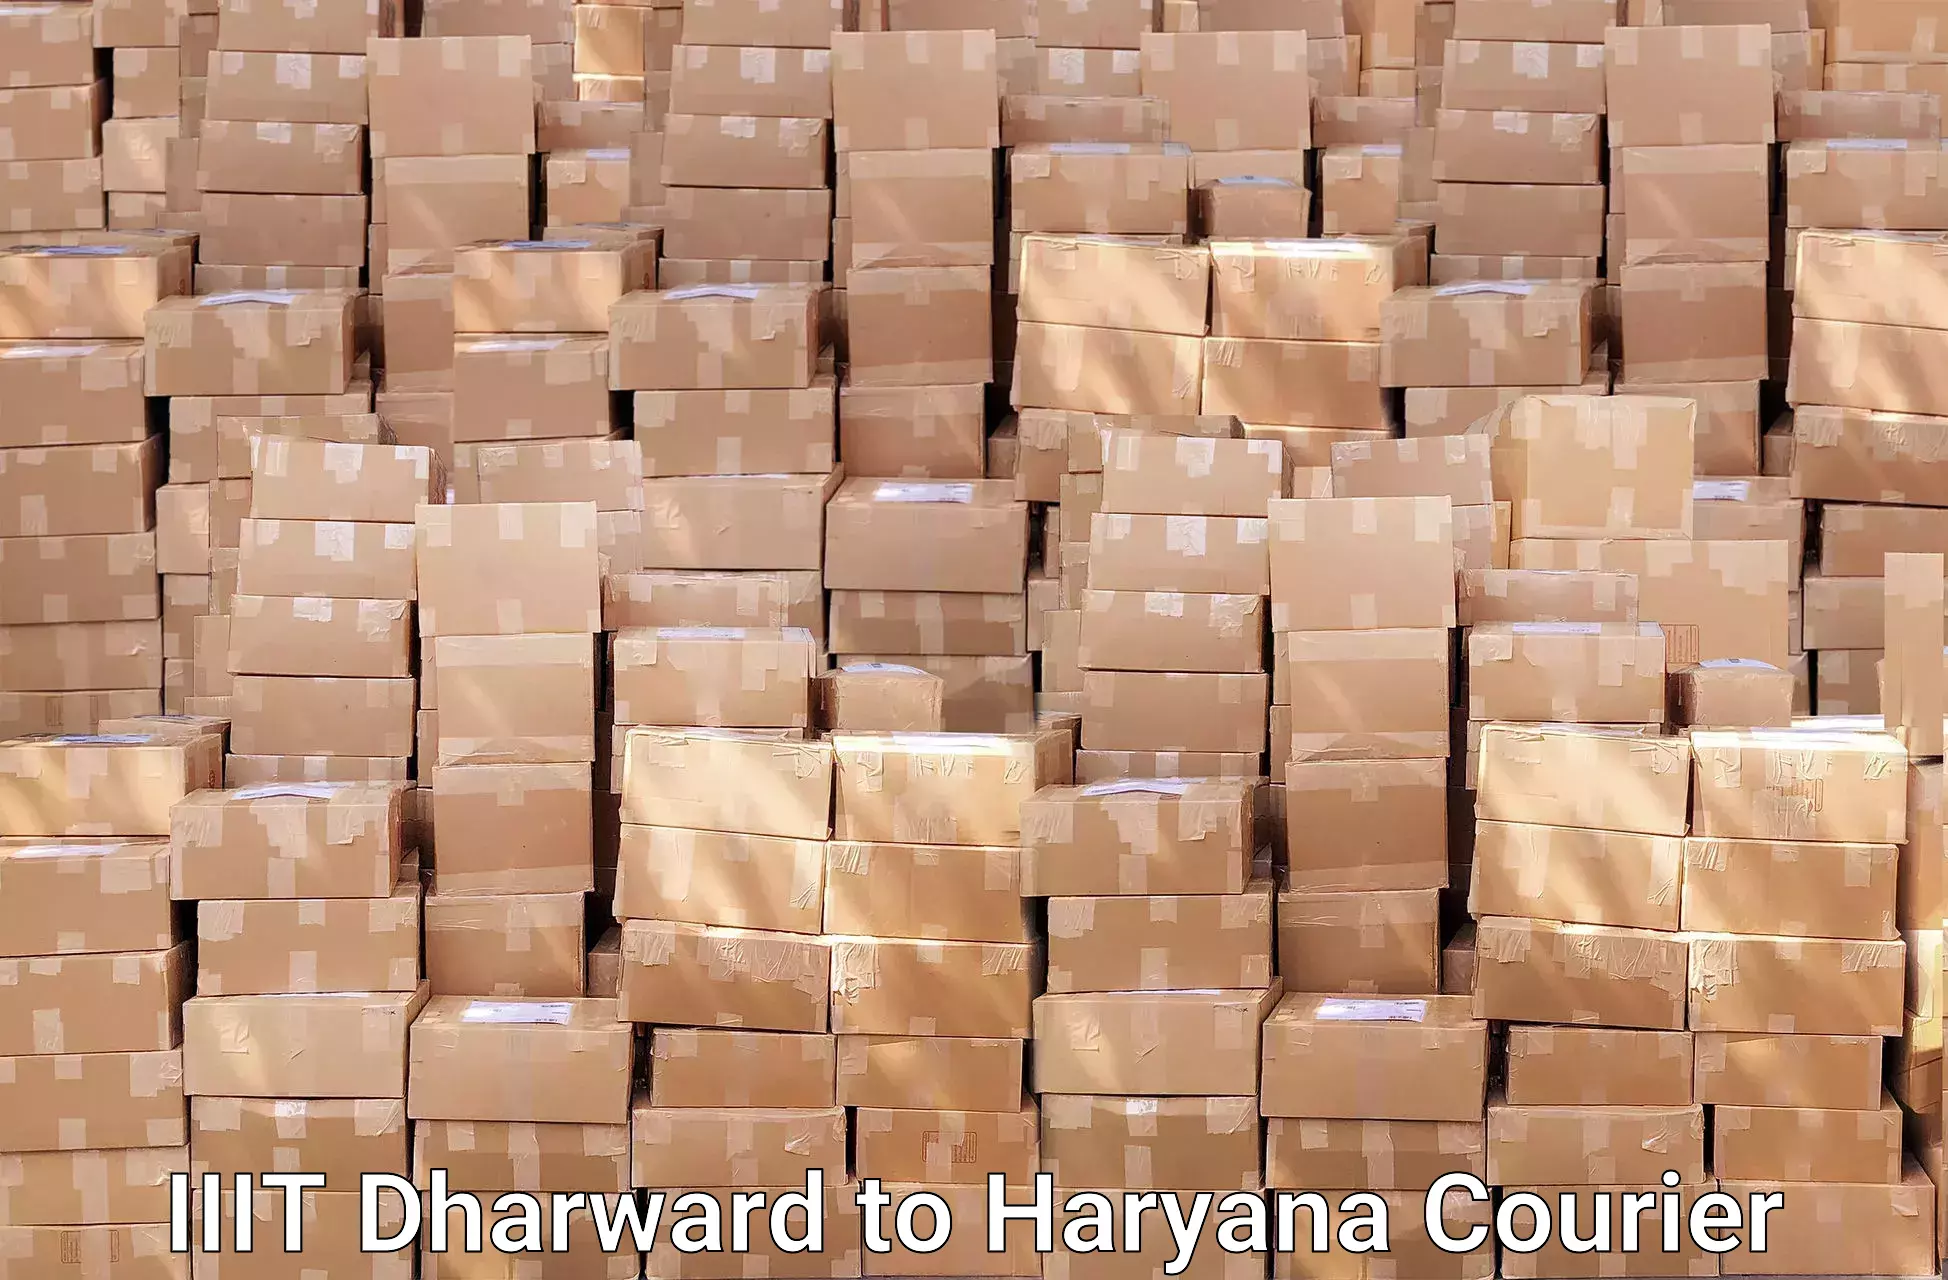 Trusted relocation experts IIIT Dharward to Haryana